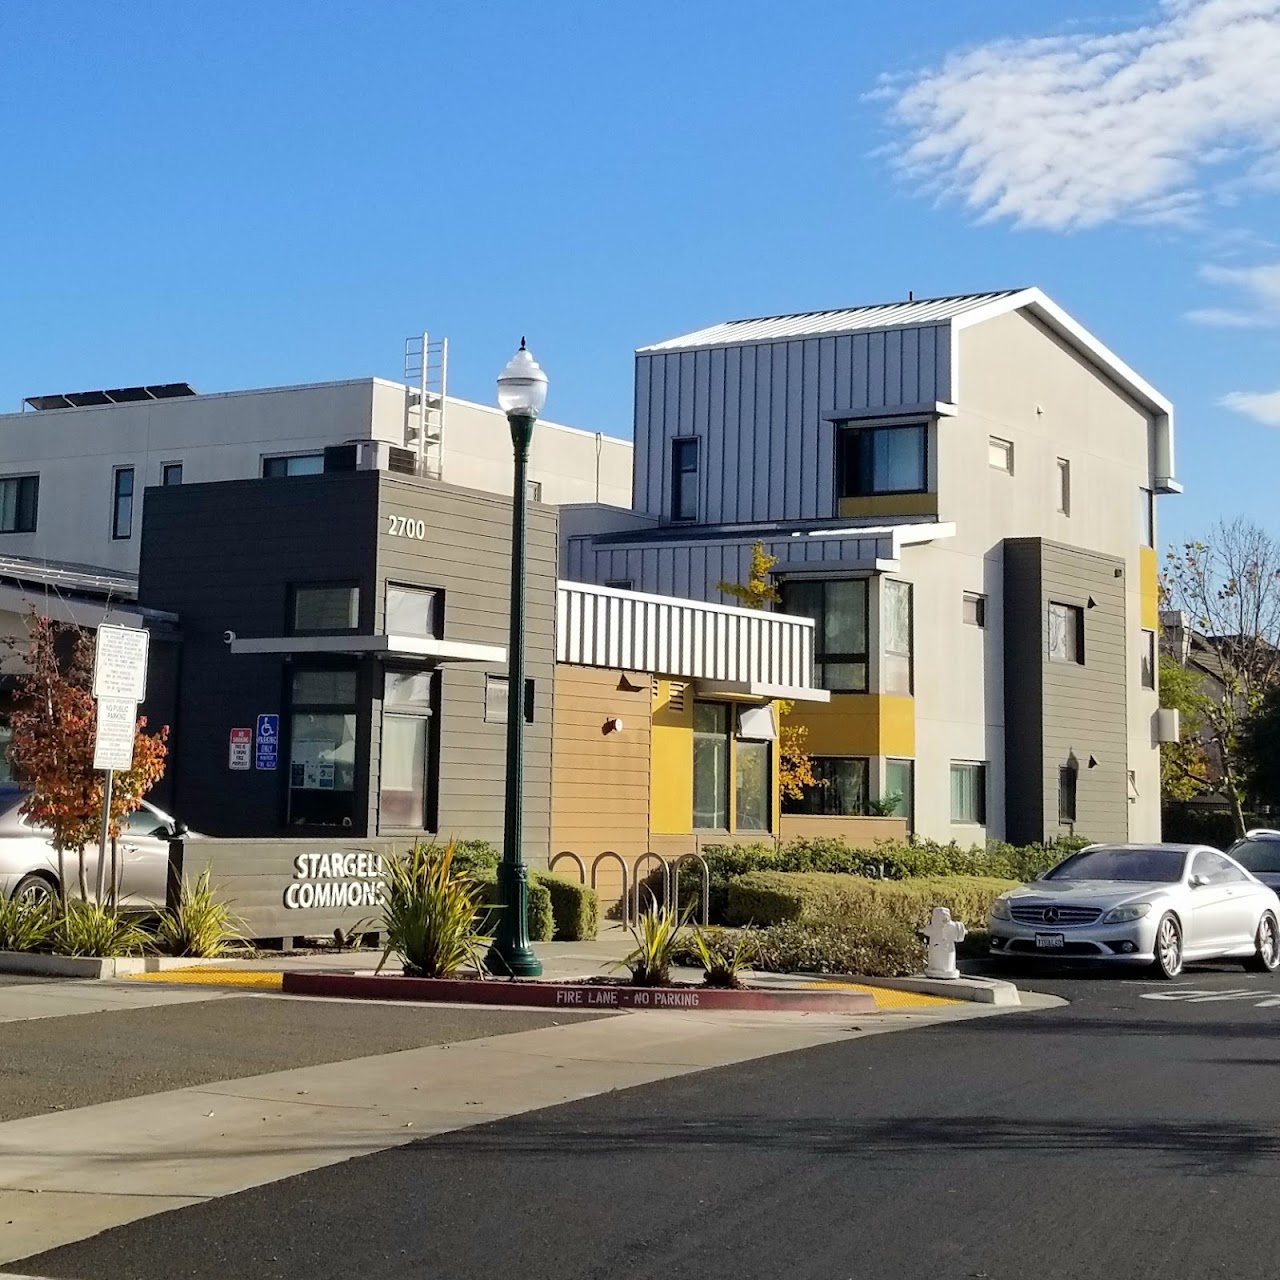 Photo of STARGELL COMMONS. Affordable housing located at 2700 BETTE STREET ALAMEDA, CA 94501